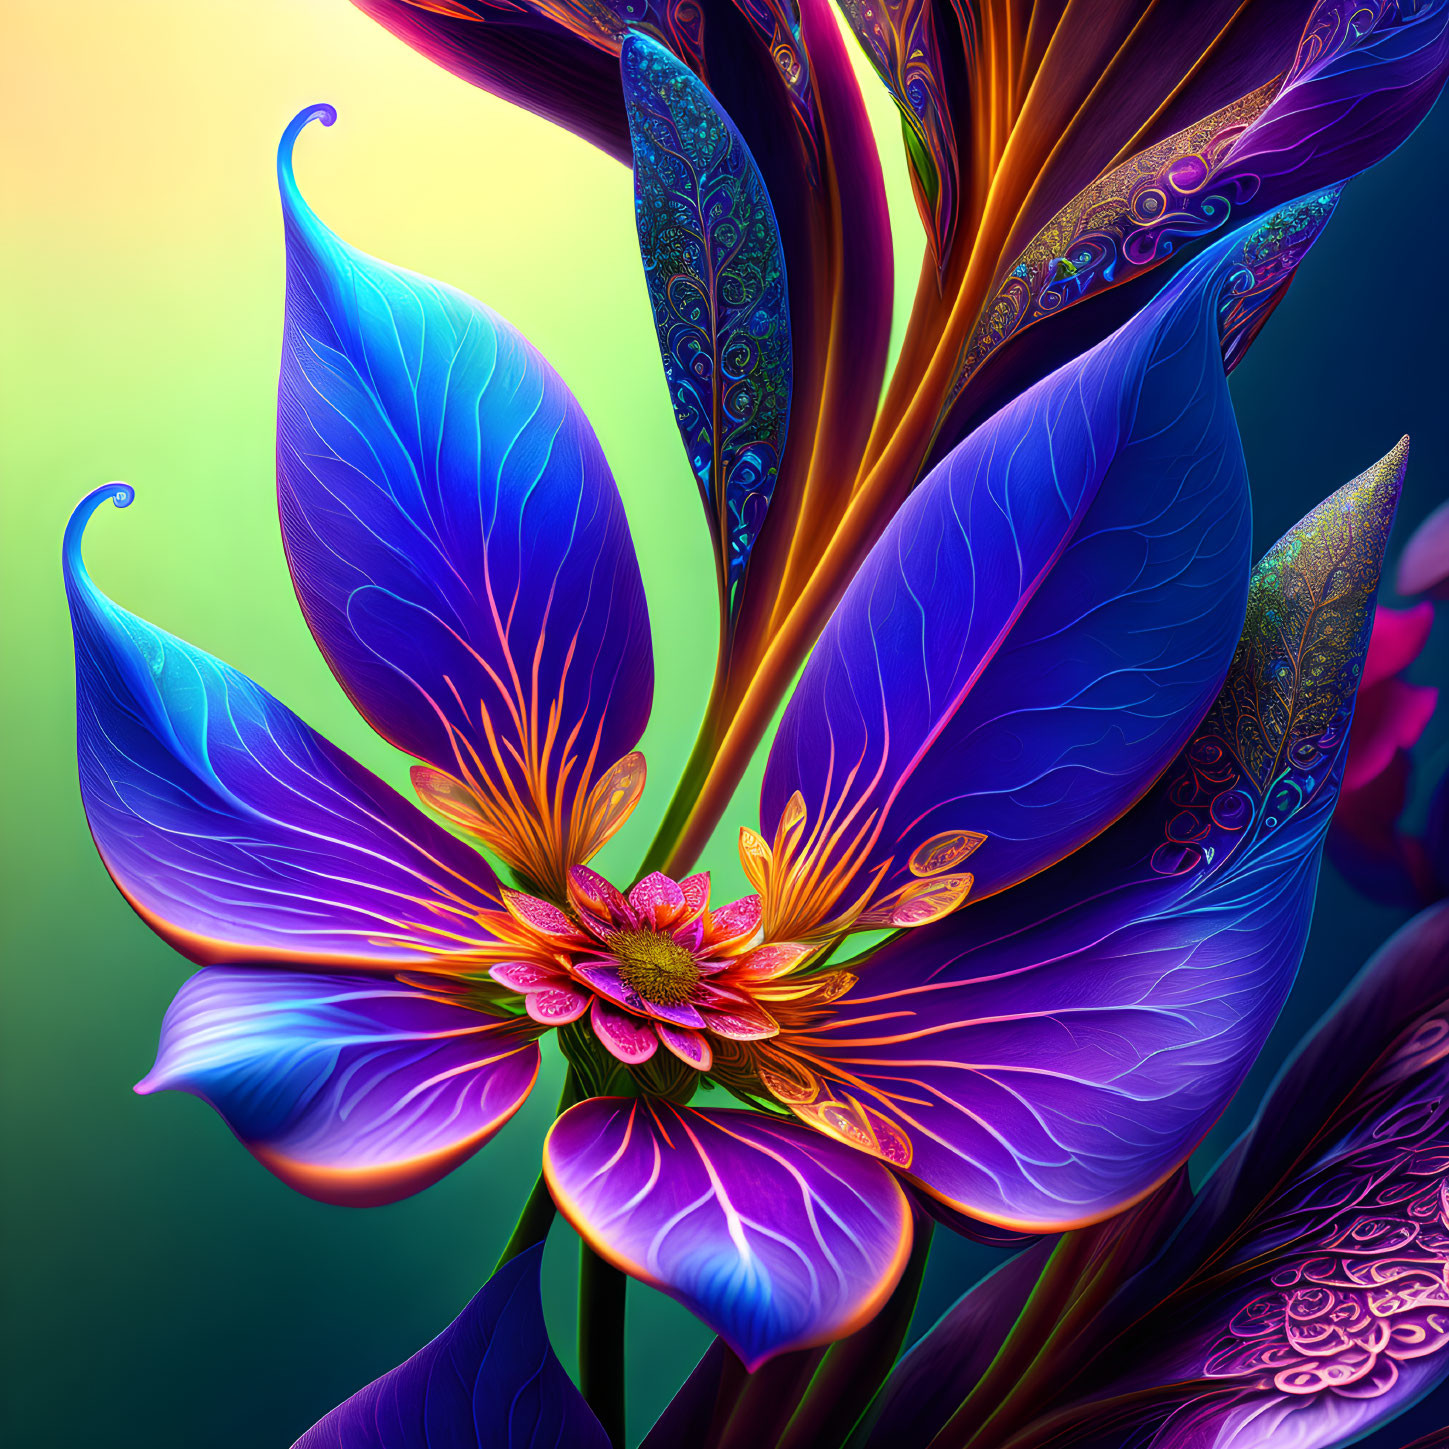 Colorful digital art: stylized flower with blue and purple petals